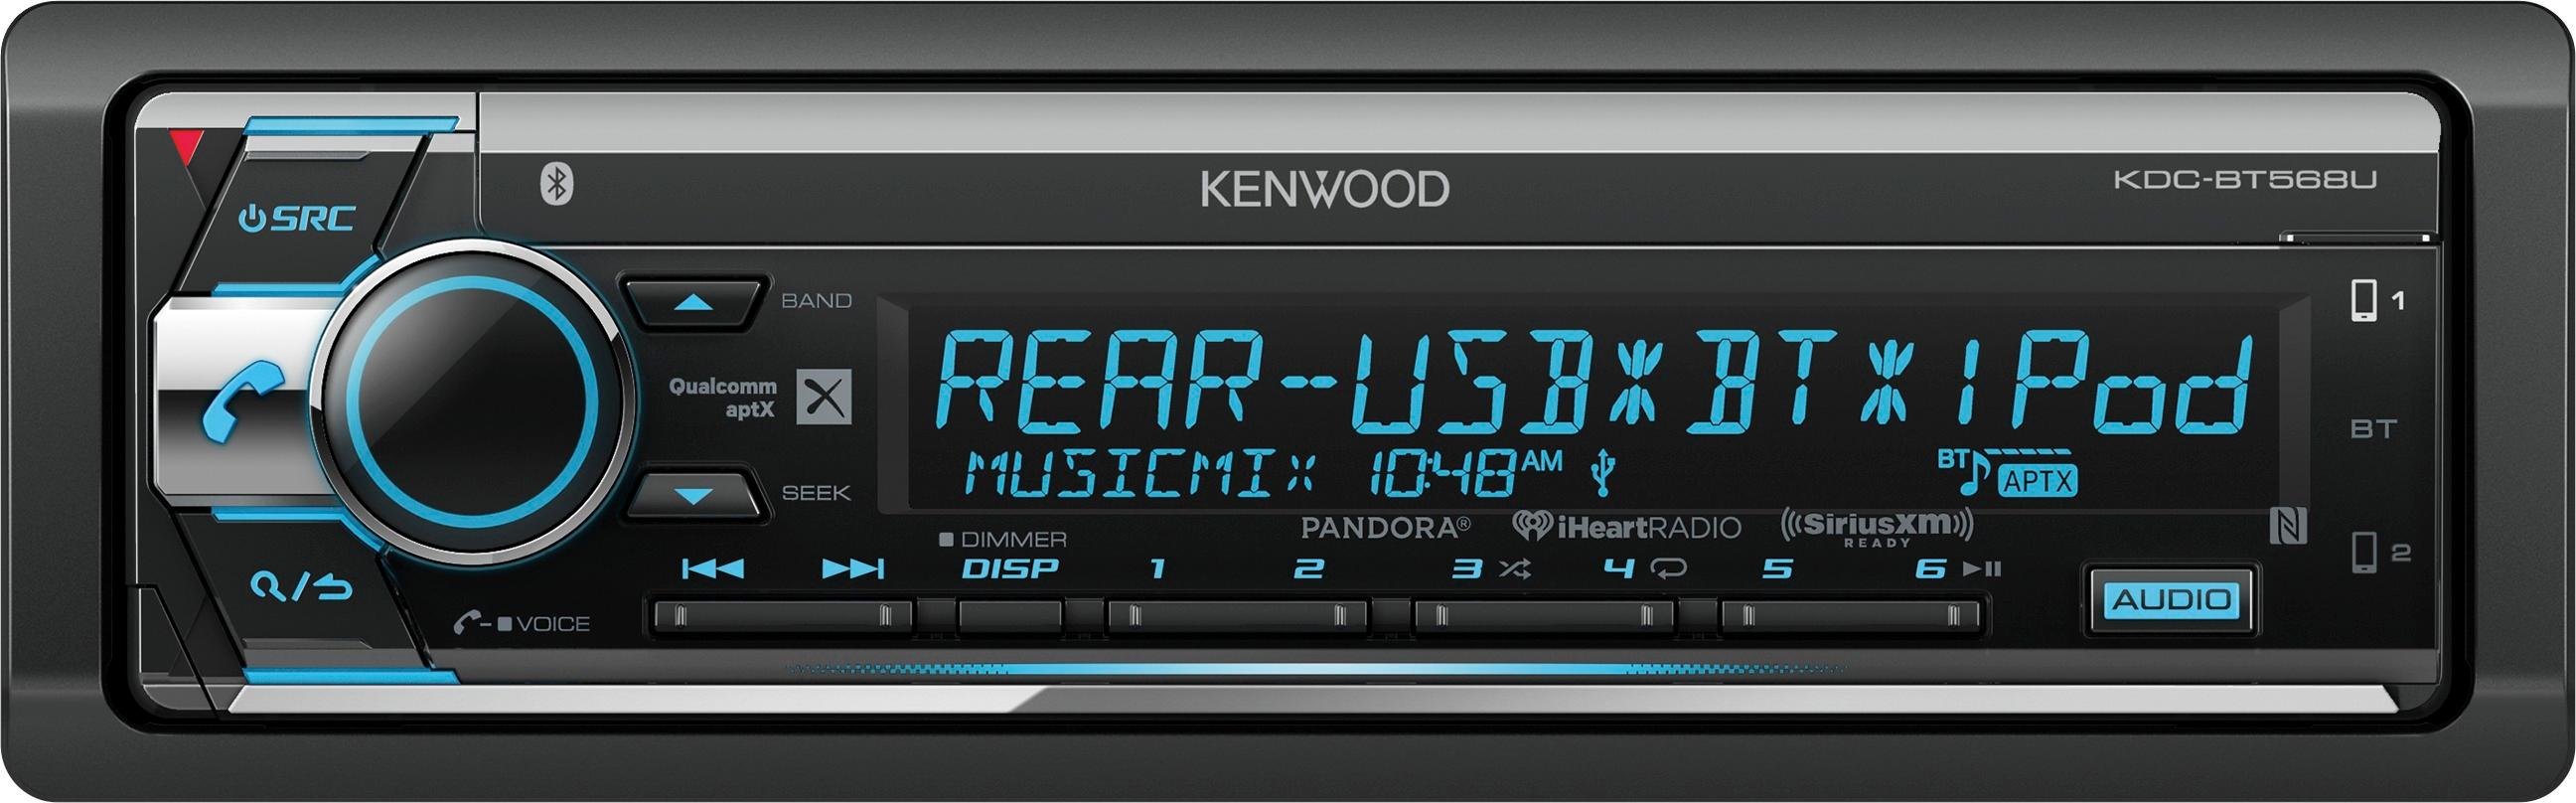 Kenwood Car Radio Stereo Extra Large Front Face Panel Case Cabinet Kdc Bt Dab 